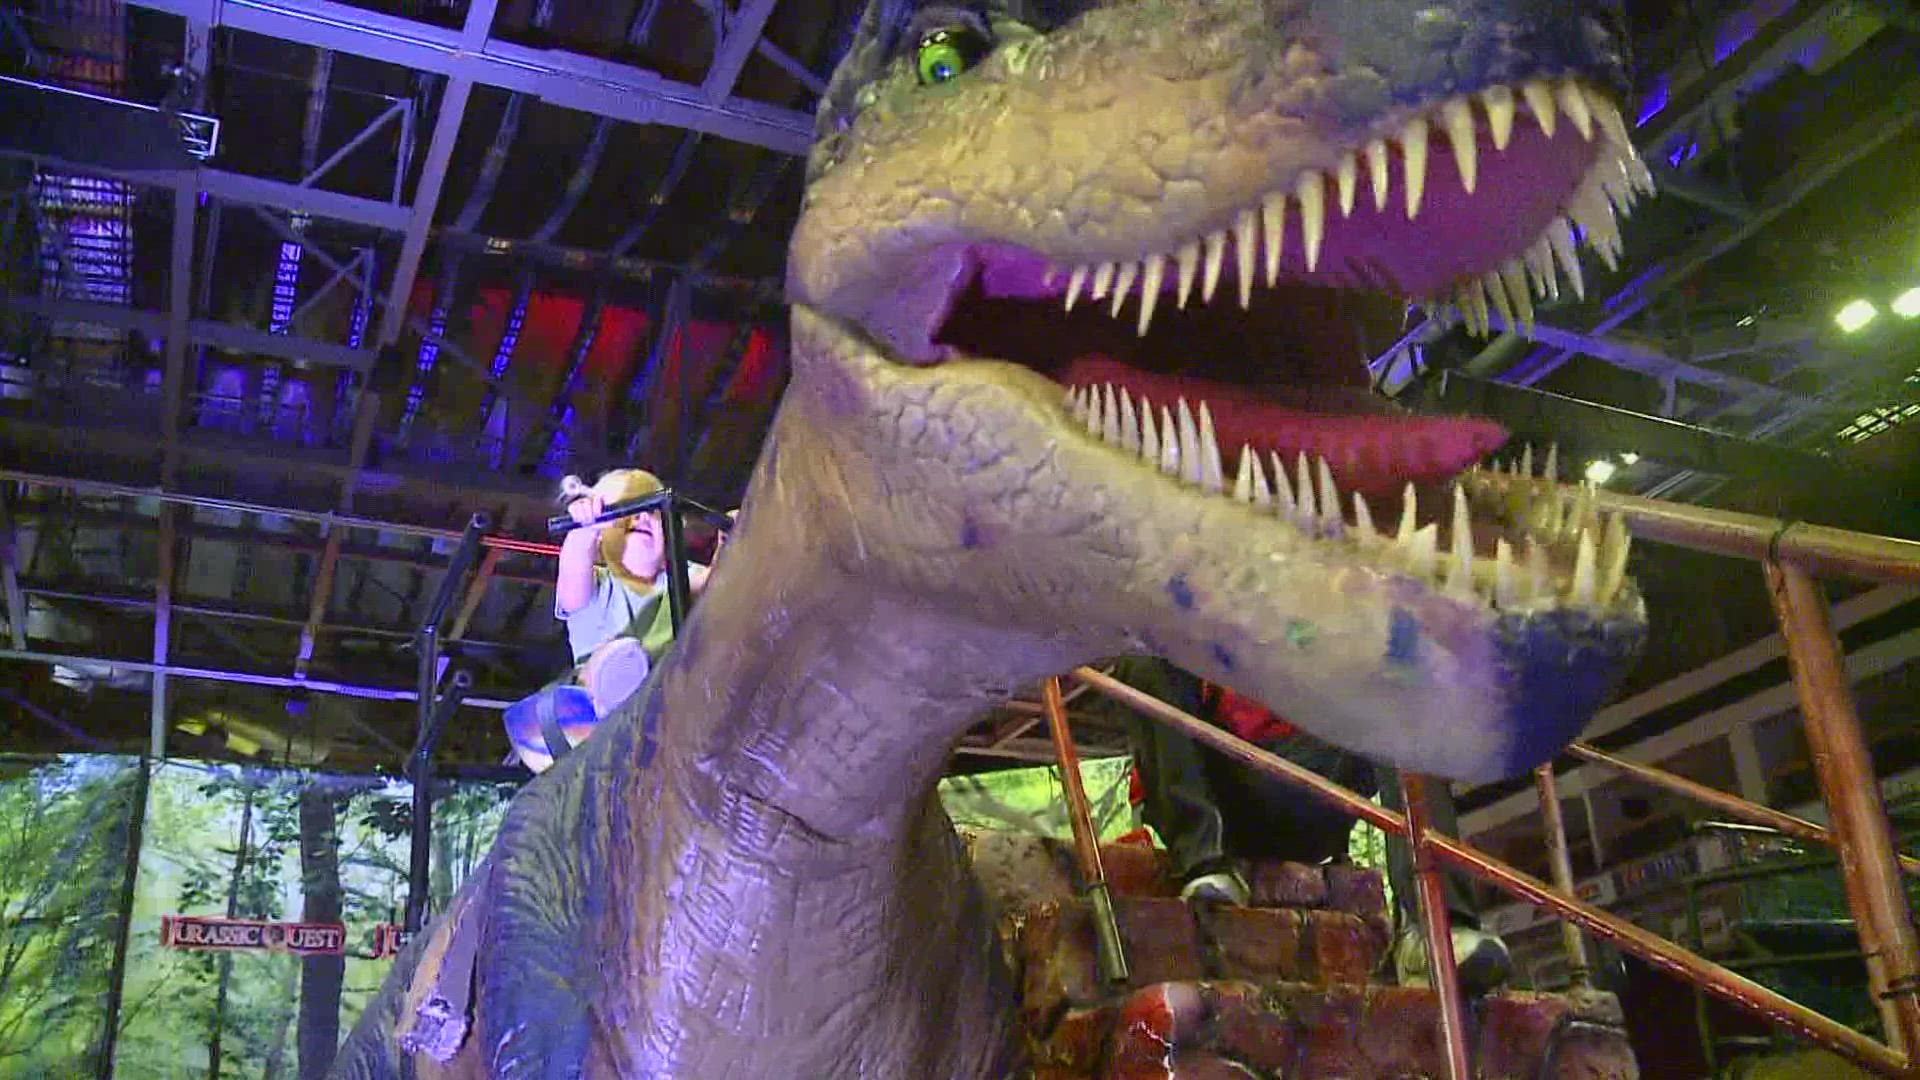 Jurassic Quest launches at the Cross Insurance Center and will be held this Friday through Sunday.